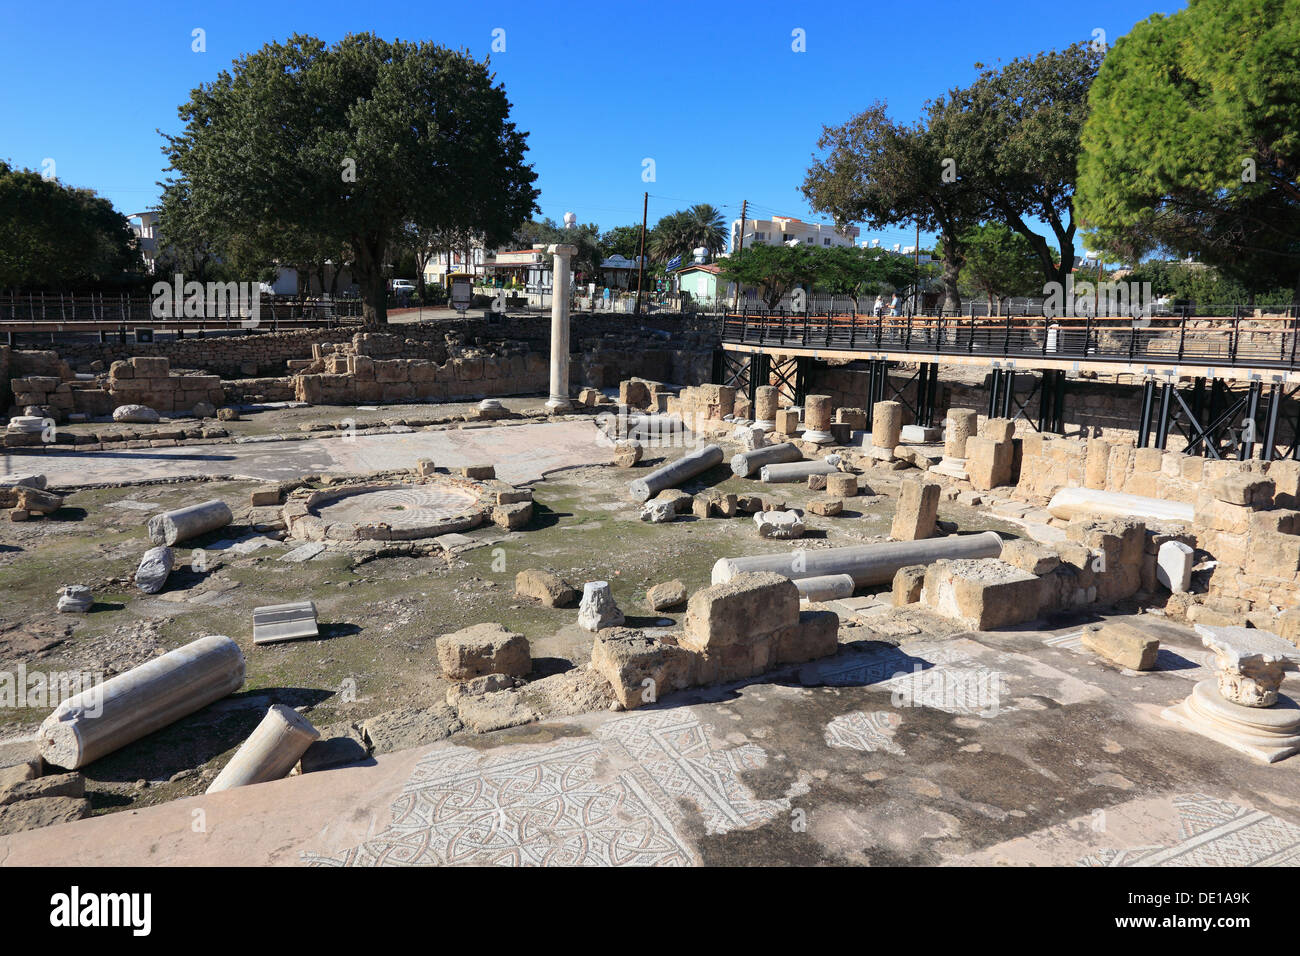 Cyprus, Pafos town, Gazibaf, historical archaeological site, ruins of sacred buildings in the church of Agia Kyriaki Chrysopolit Stock Photo